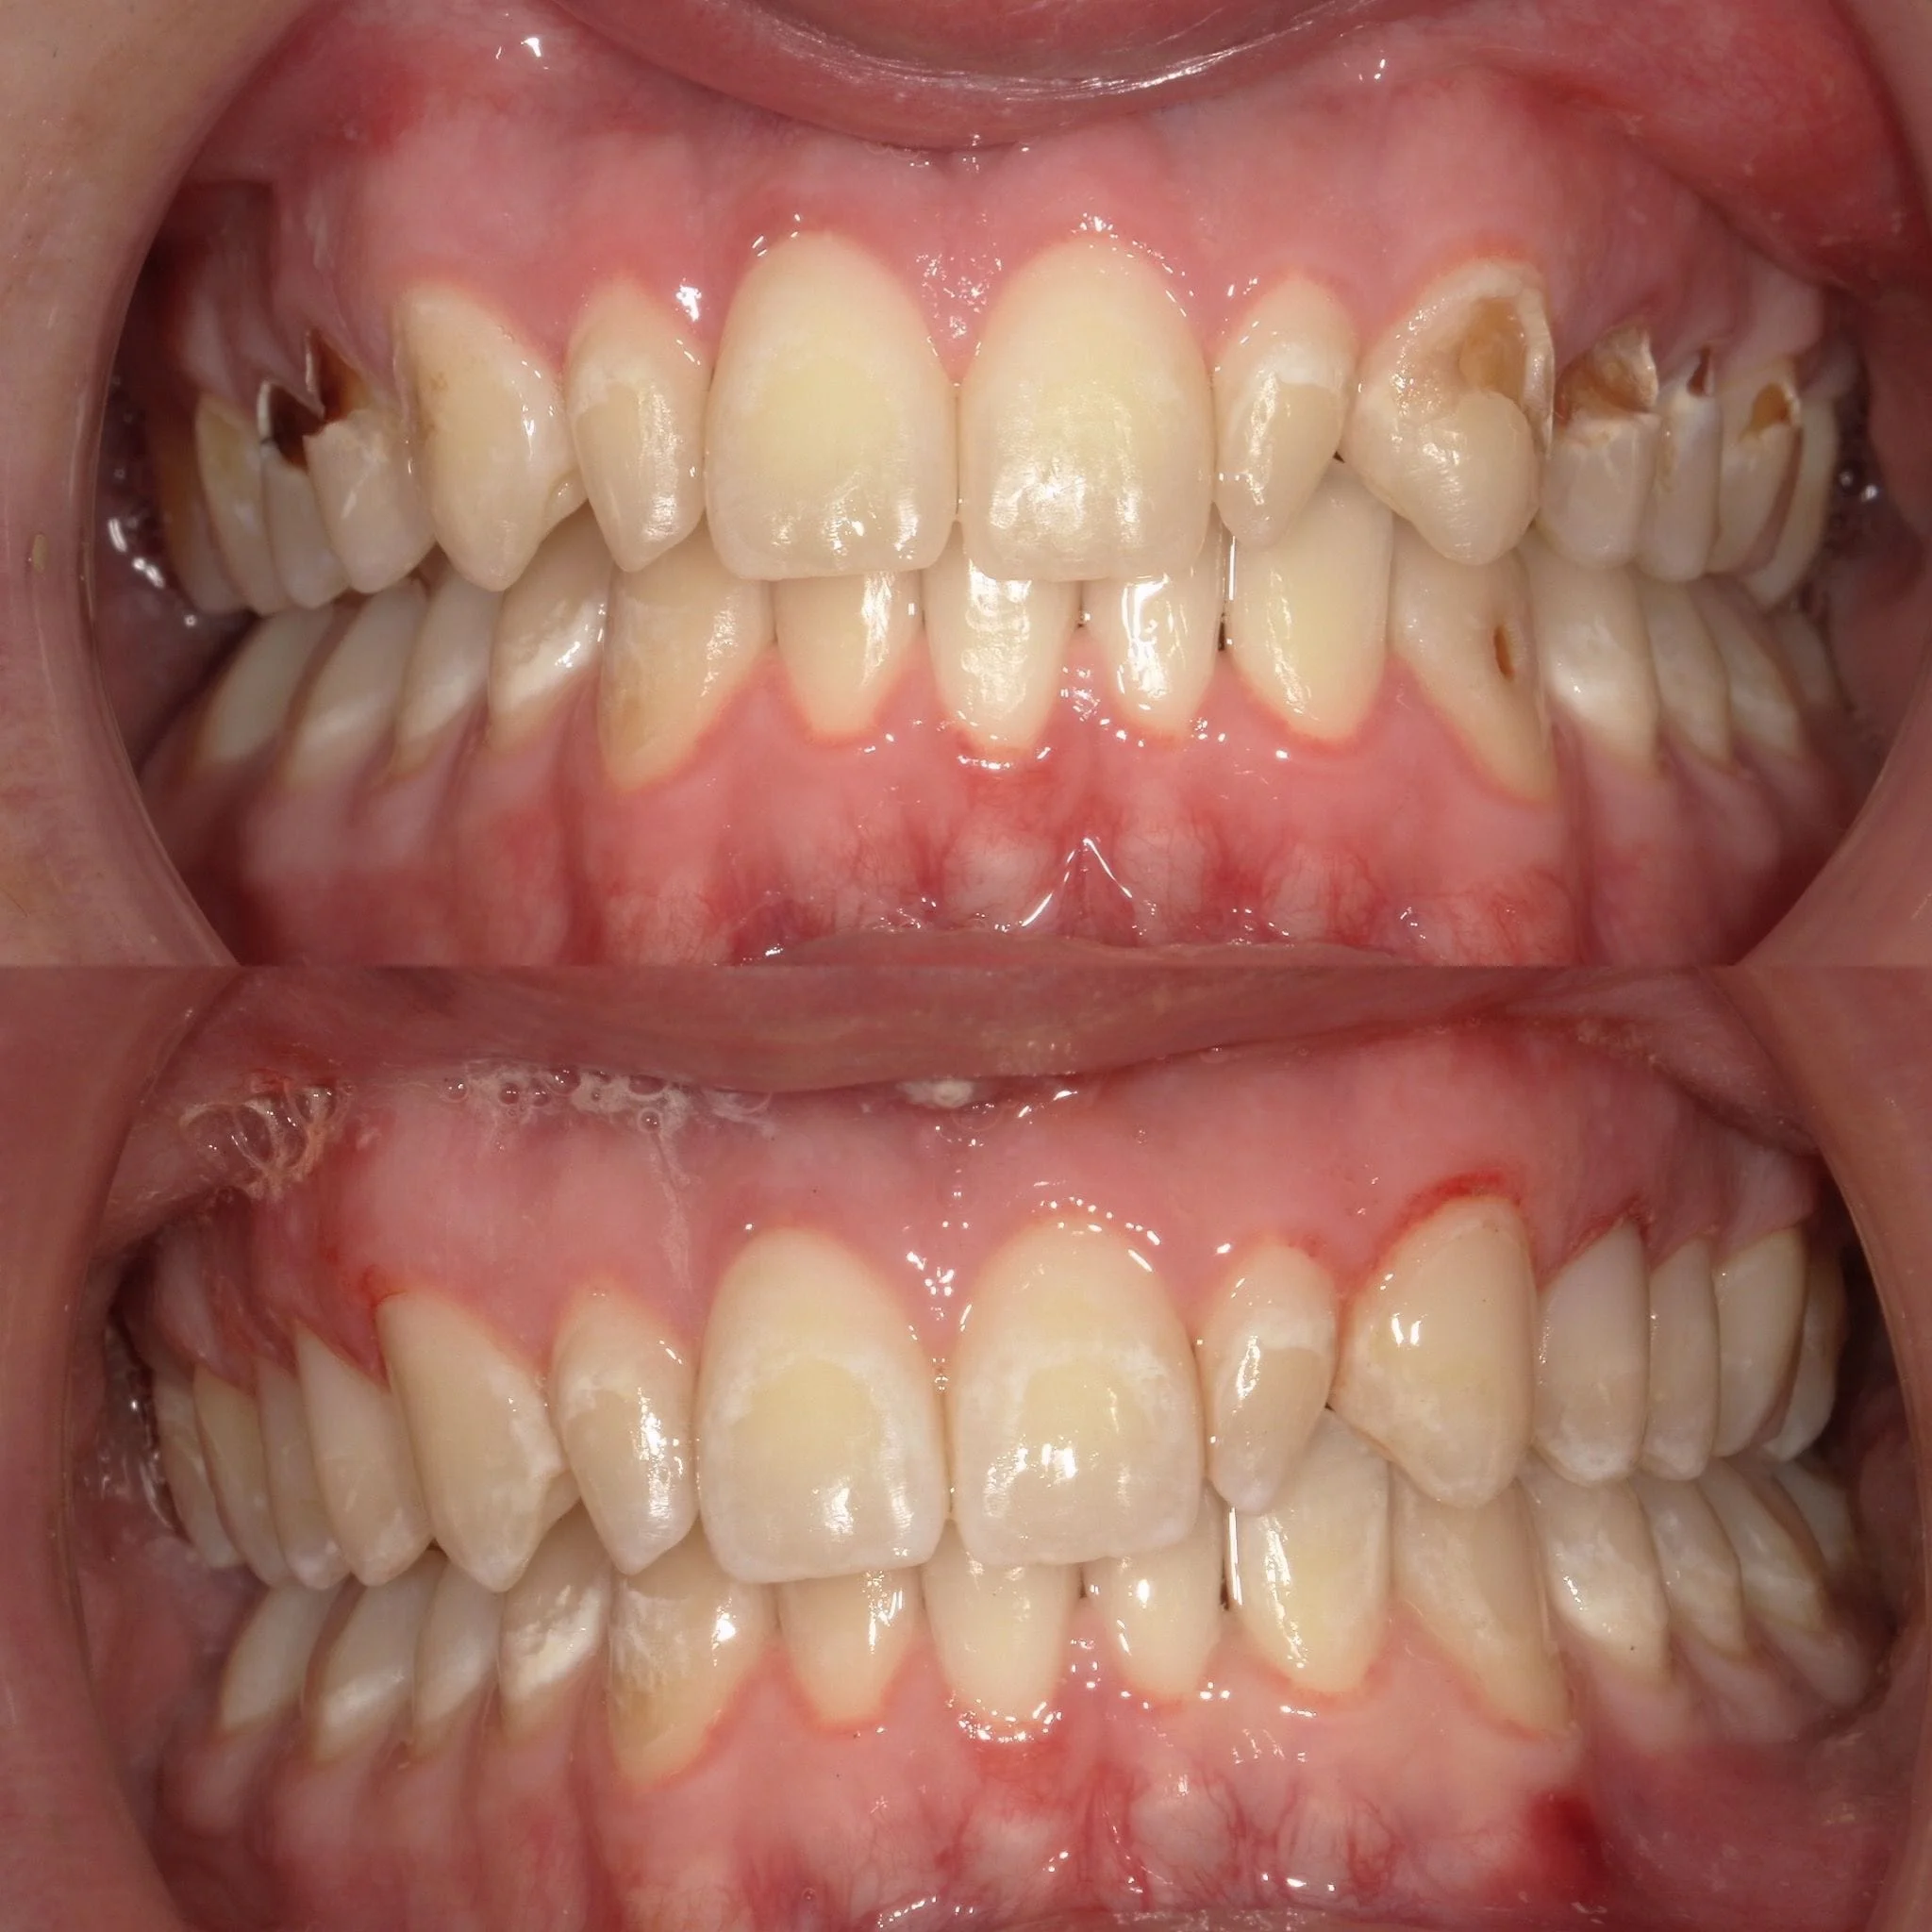 Decay removal, new smile